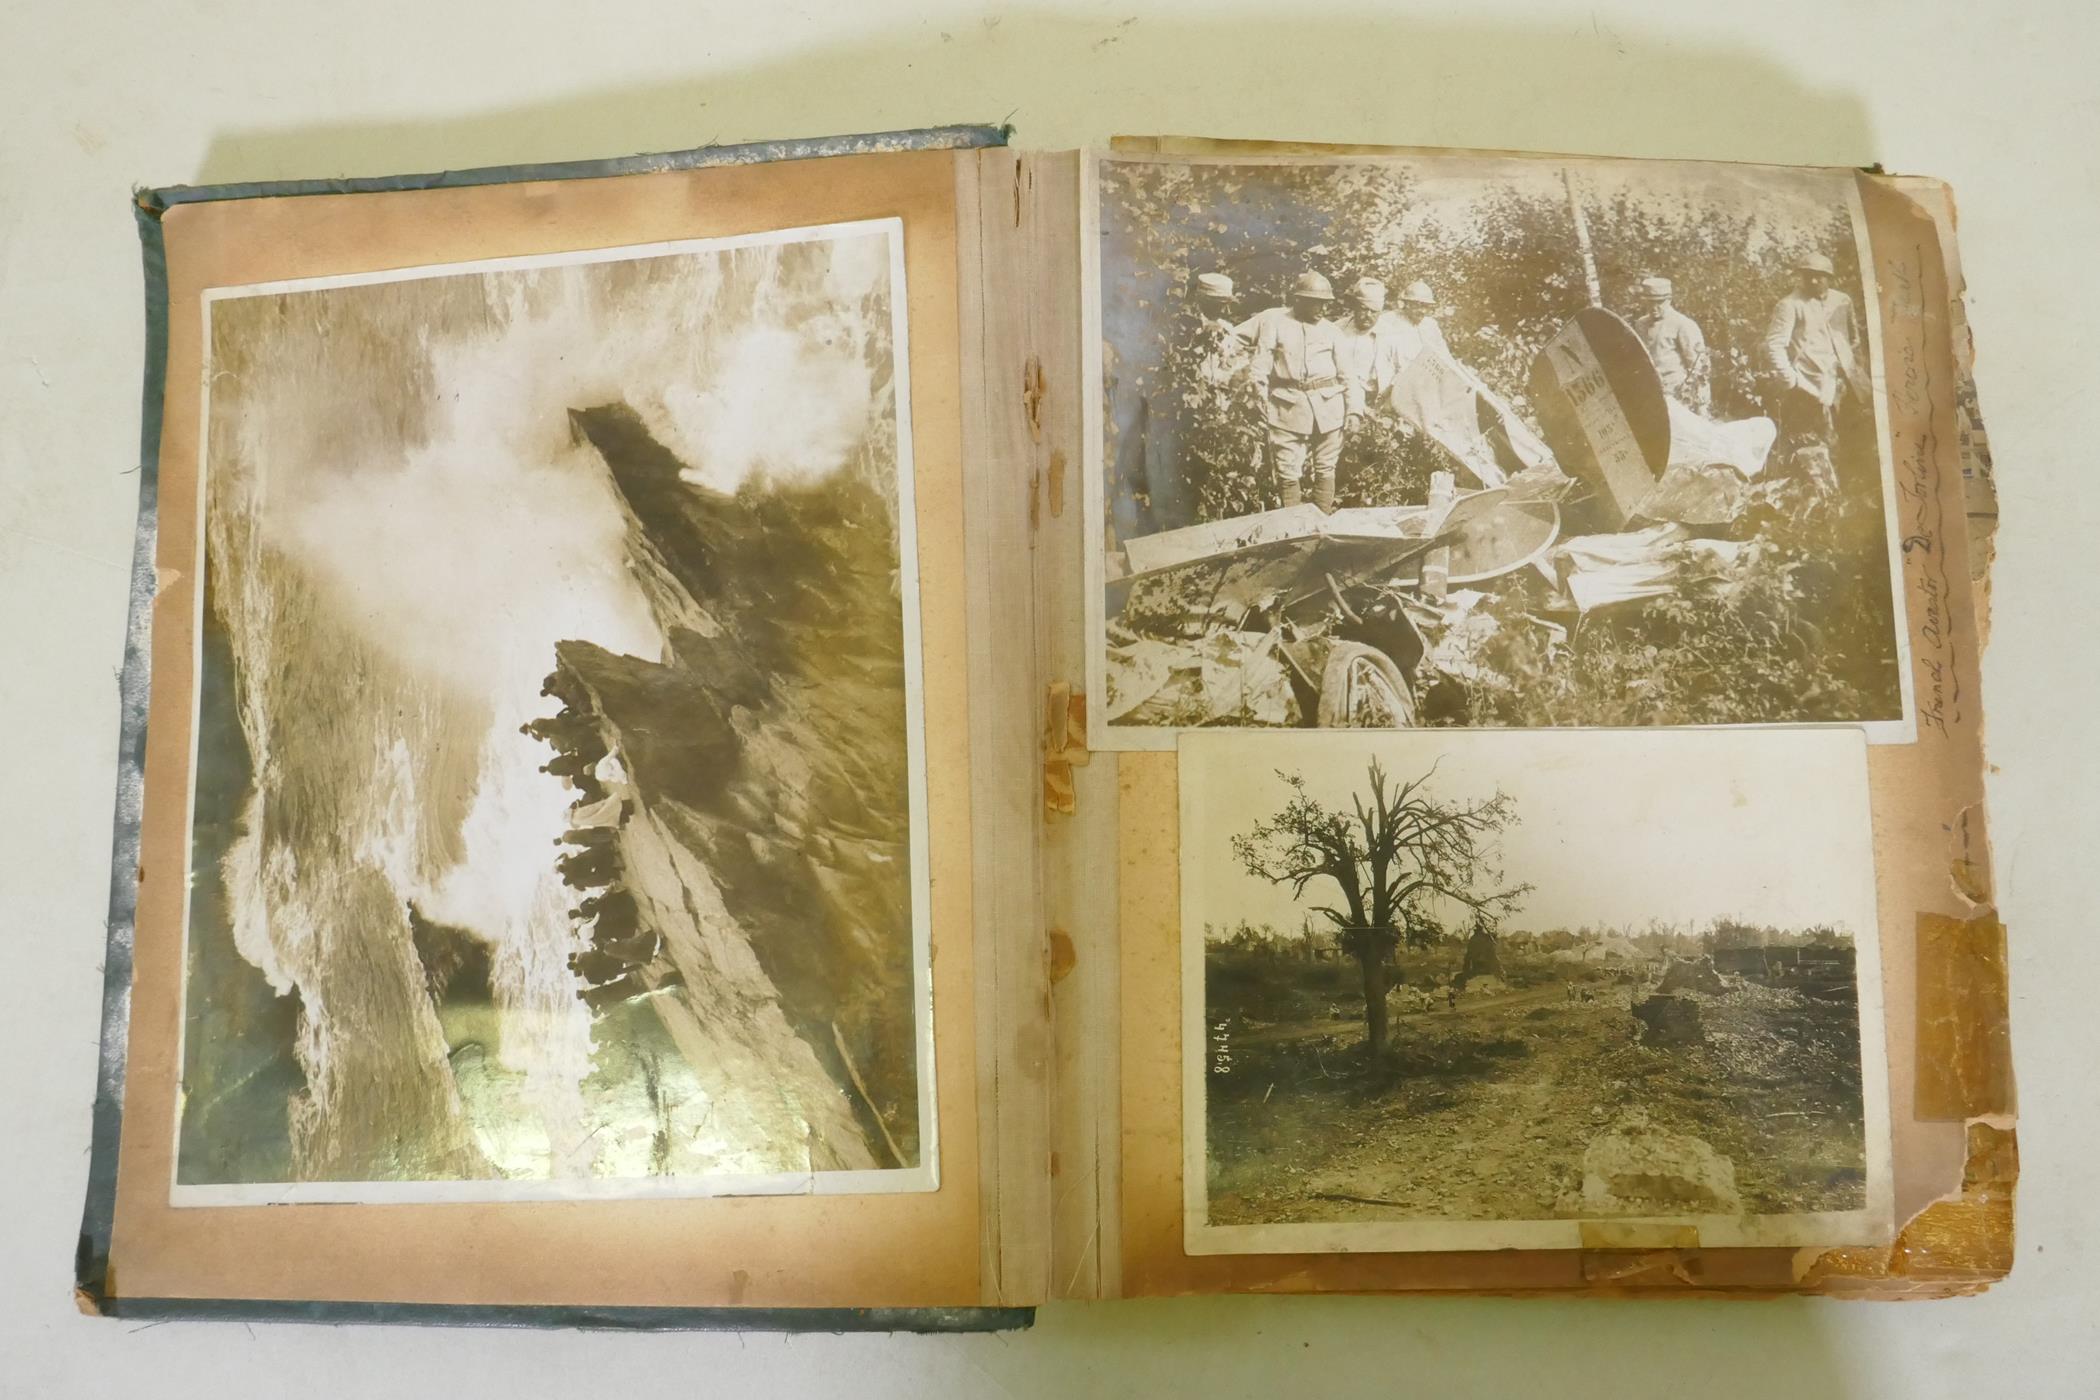 A scrap book of photographs from the Great War, images of the Western Front, artillery and trenches,